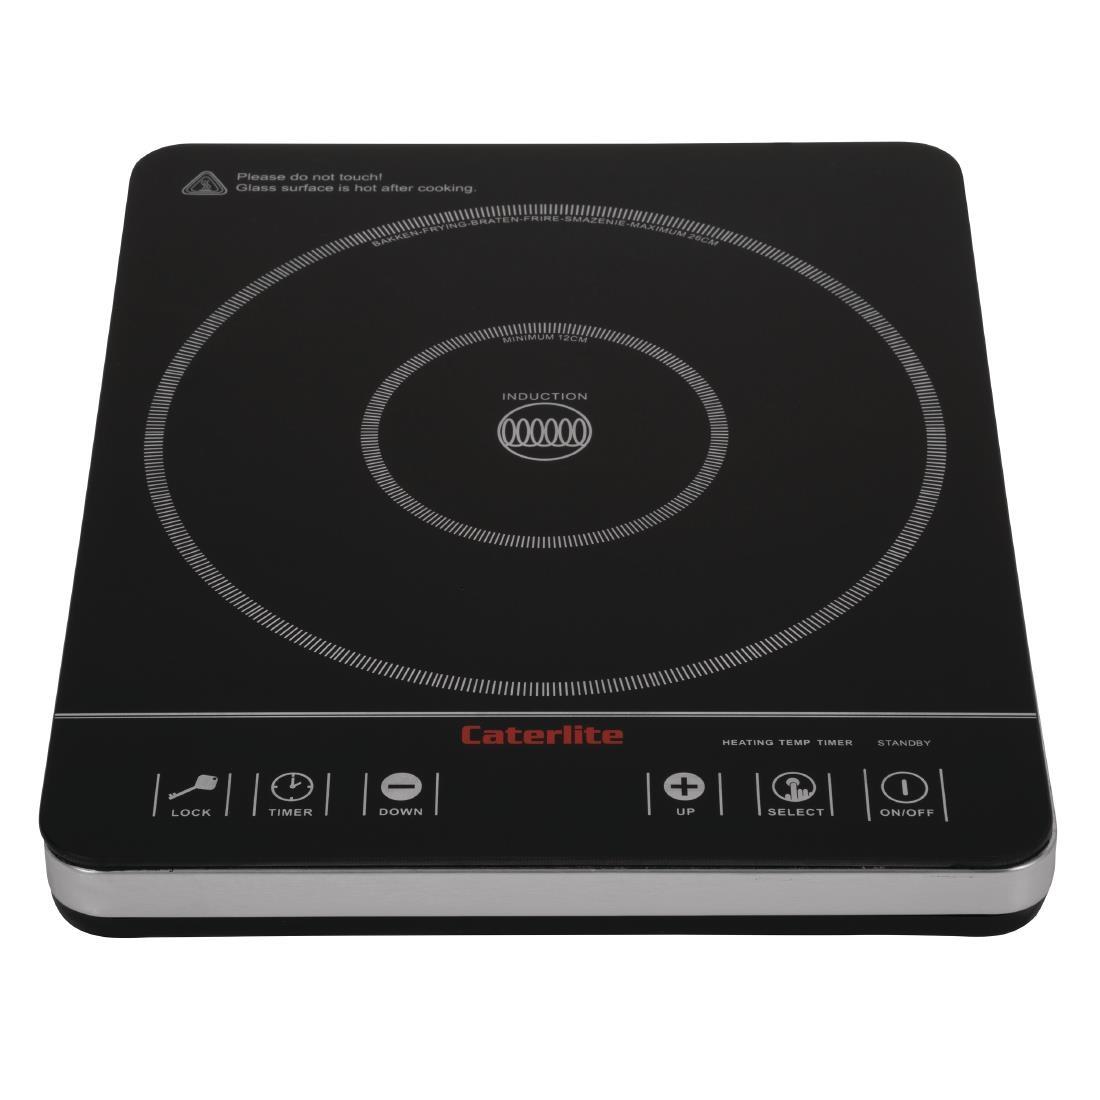 Caterlite Induction Hob 2000W - CM352  - 3